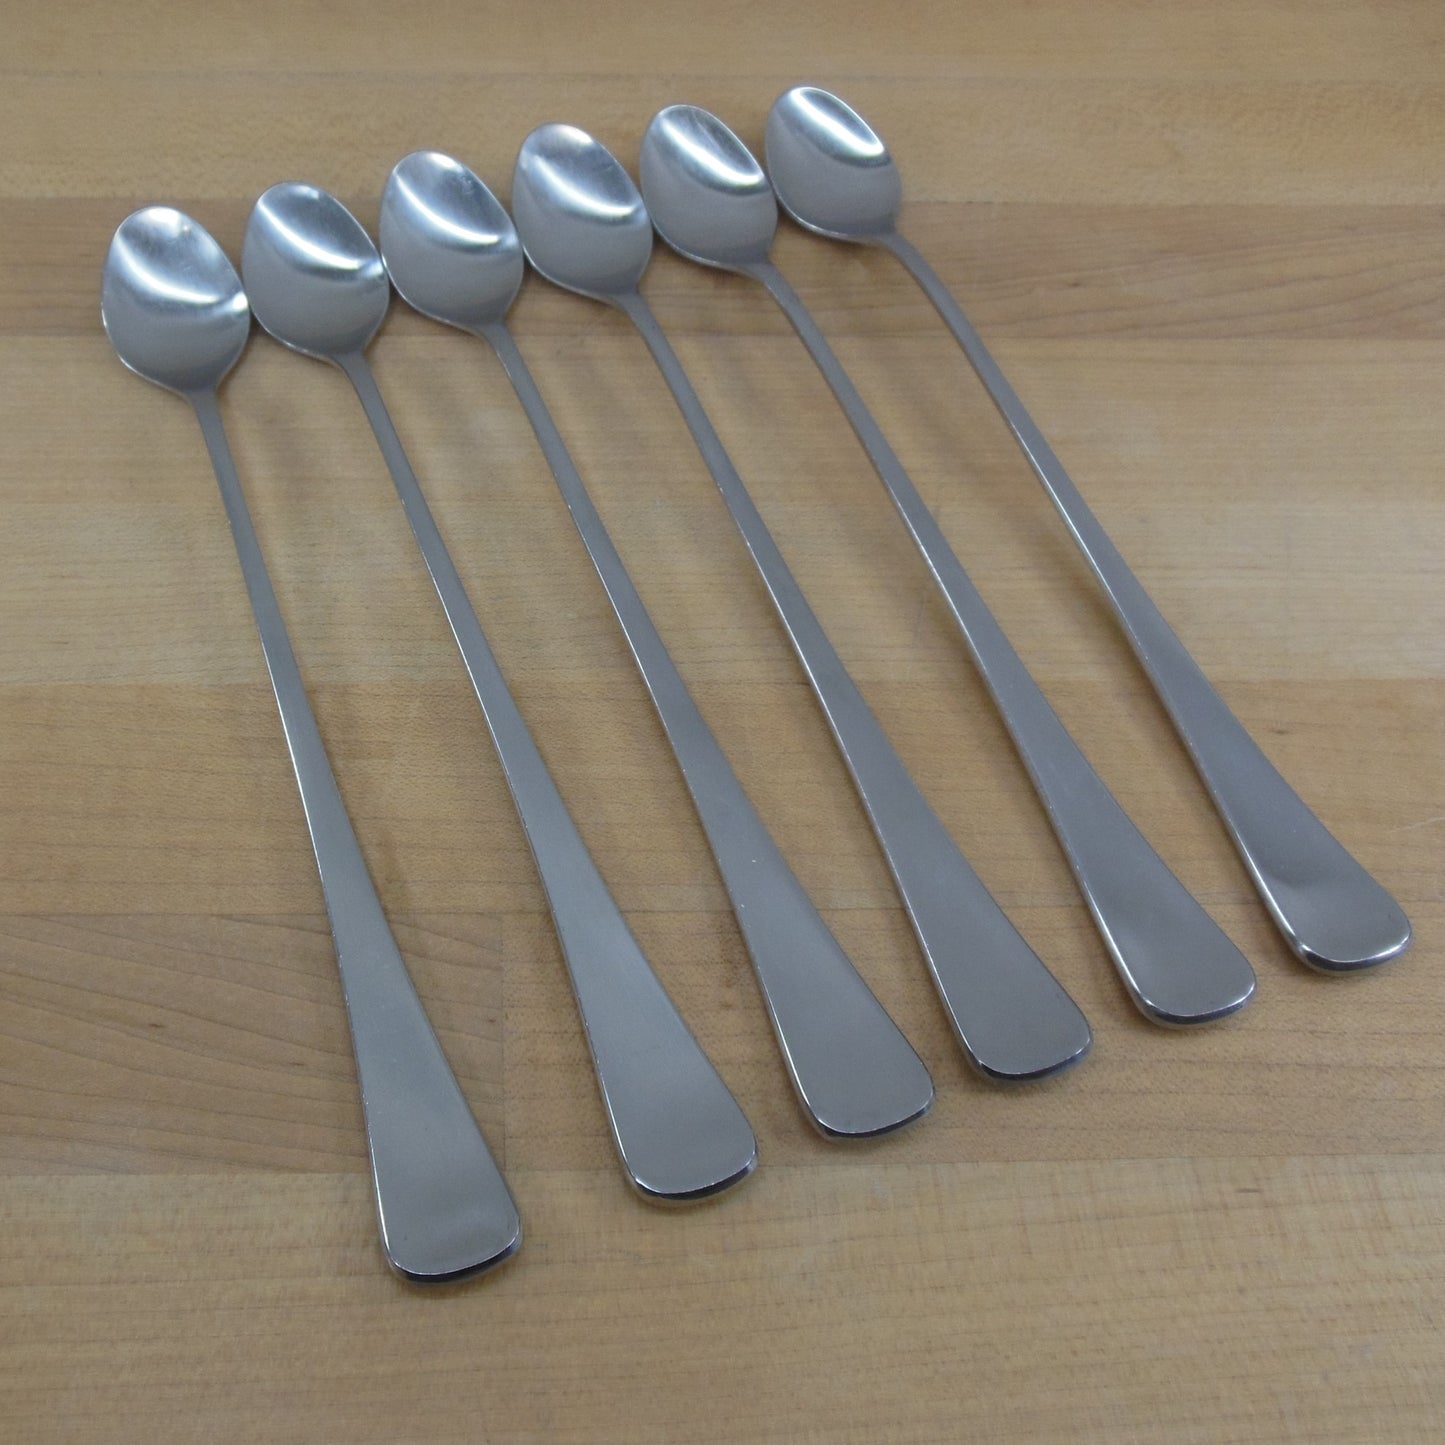 WMF Germany Cromargan Stainless Finesse Flatware - 6 Set Iced Tea Spoons